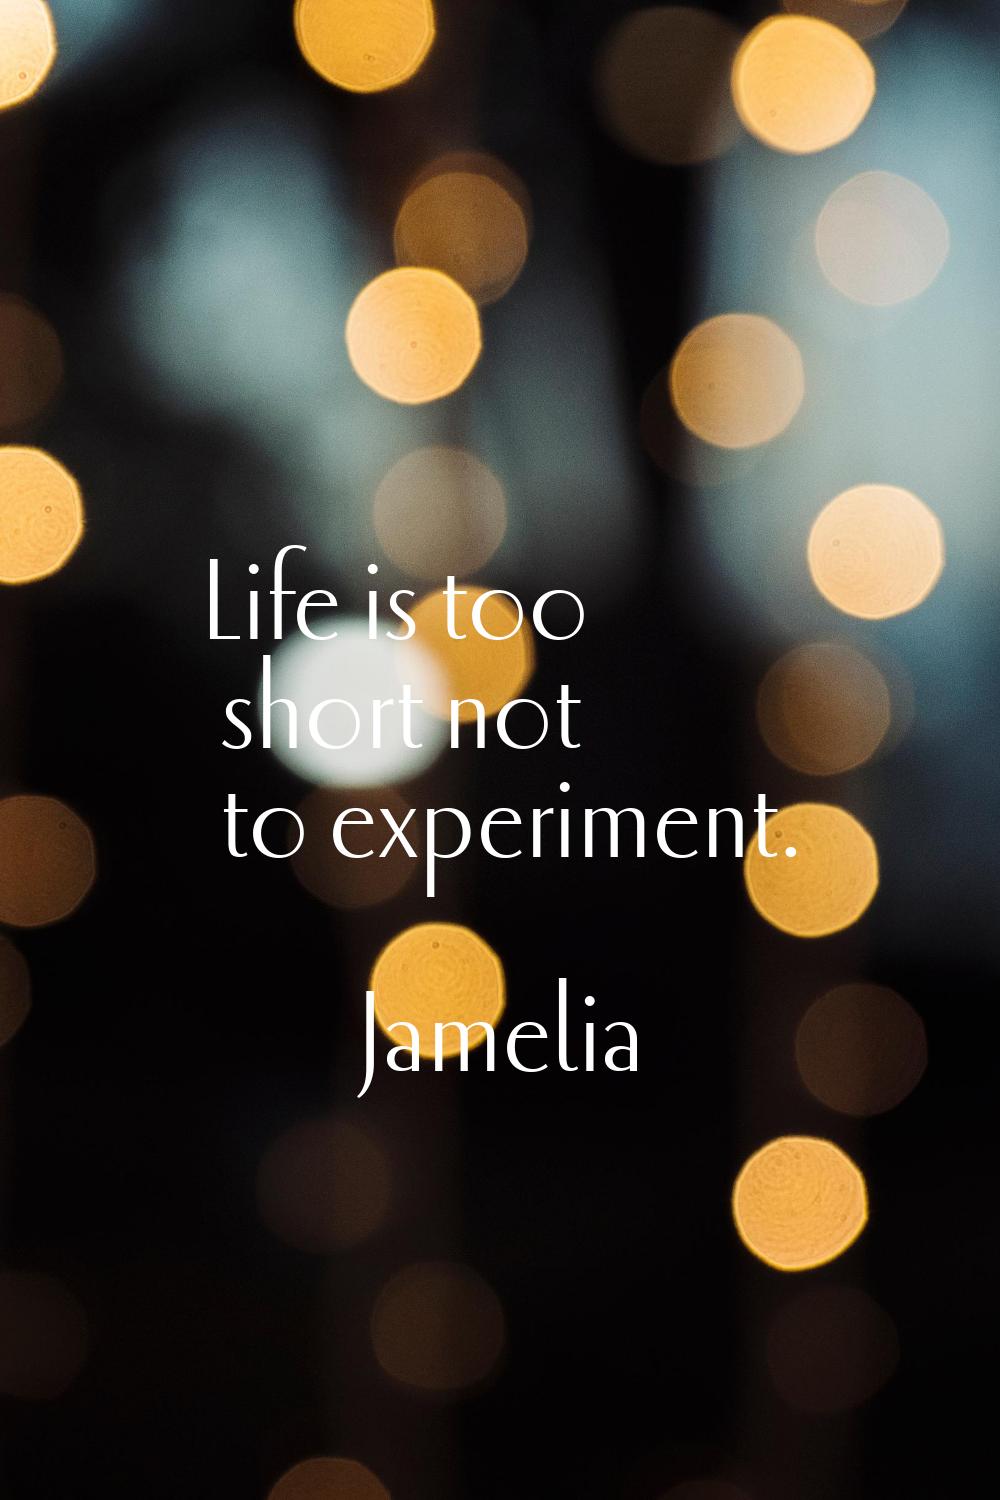 Life is too short not to experiment.